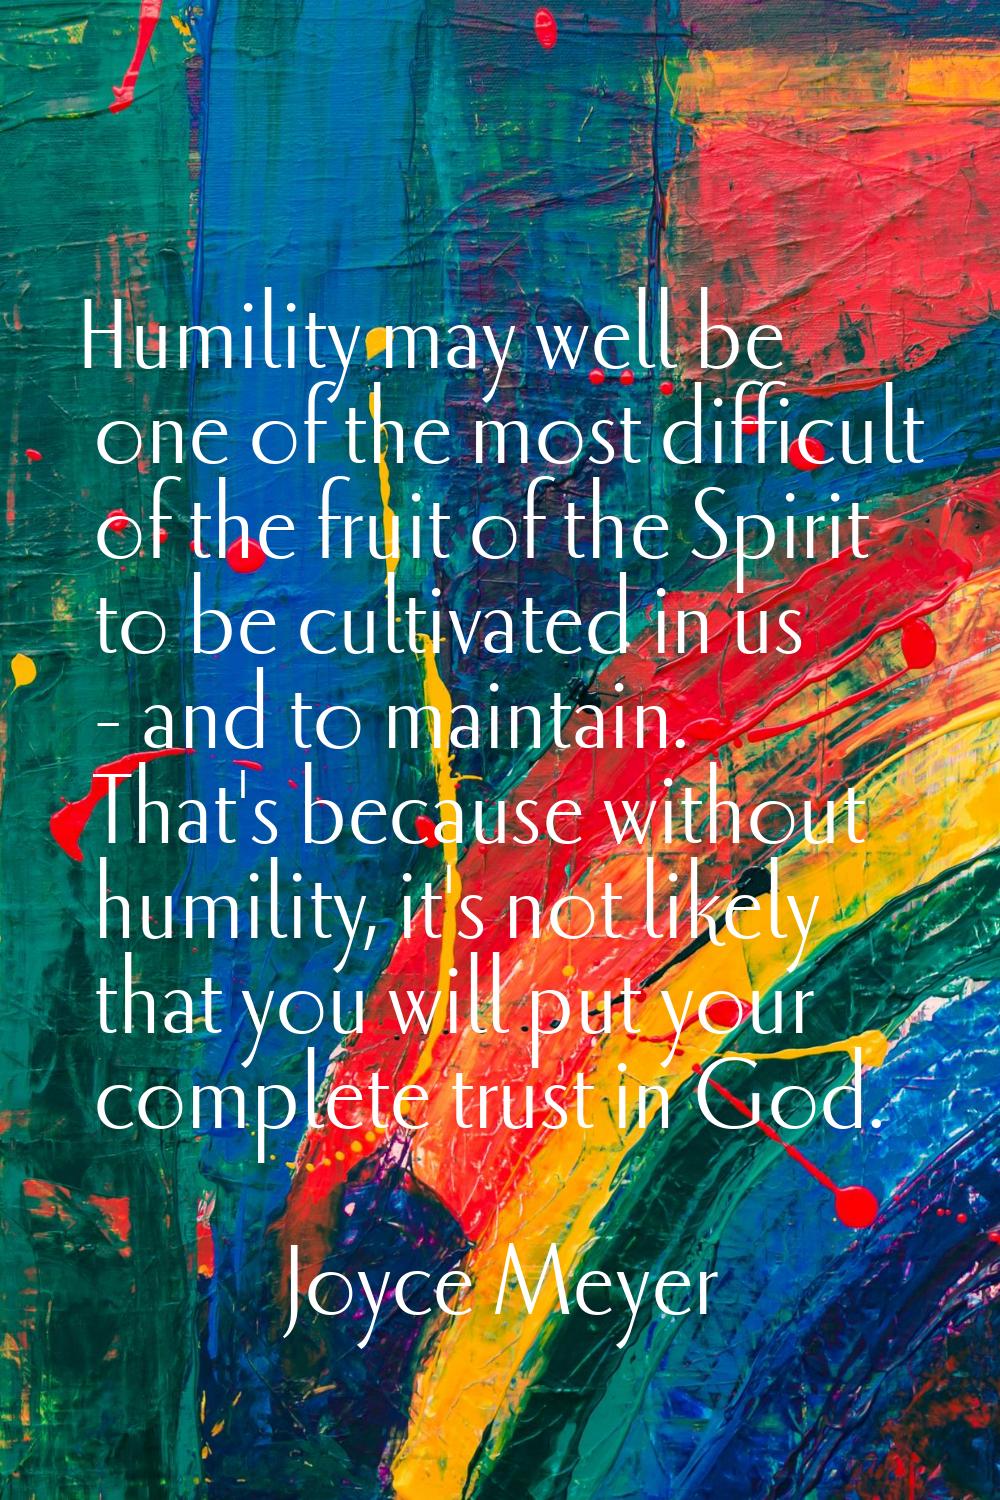 Humility may well be one of the most difficult of the fruit of the Spirit to be cultivated in us - 